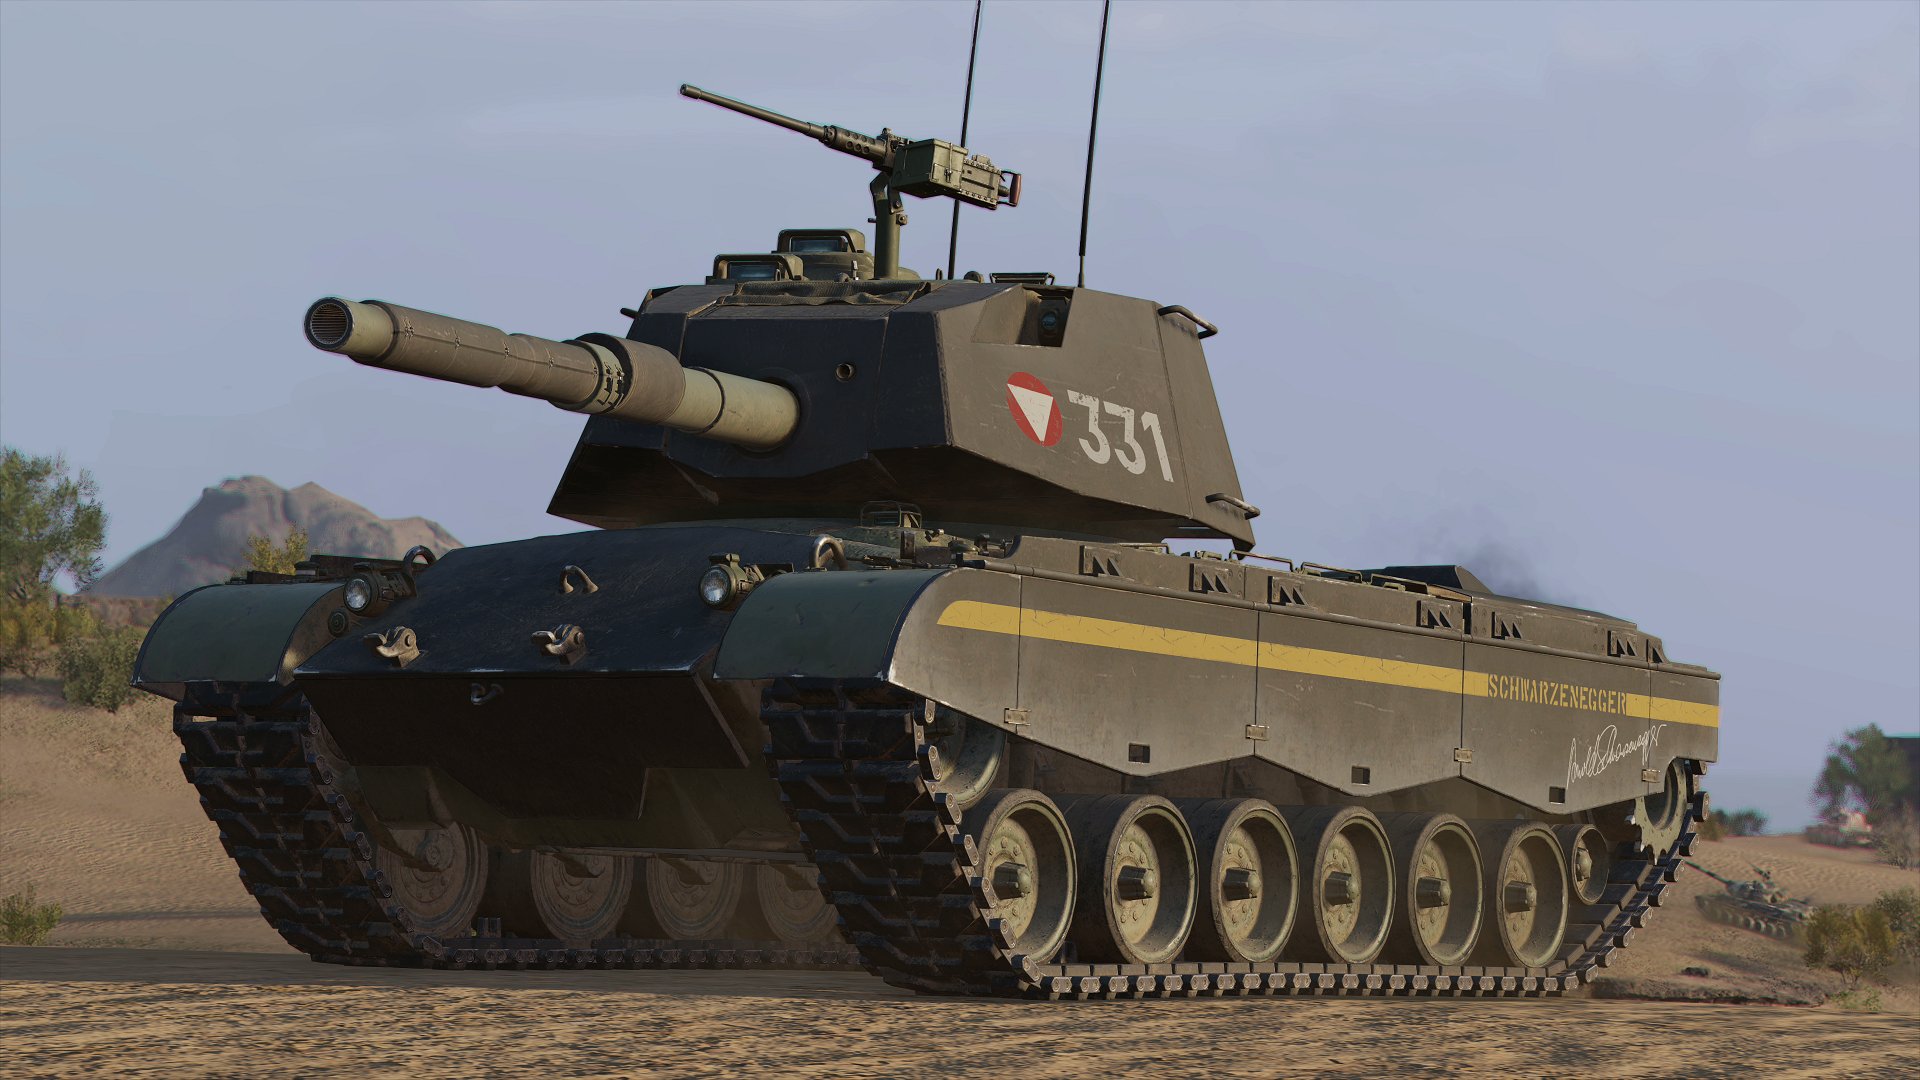 The Future of World of Tanks 